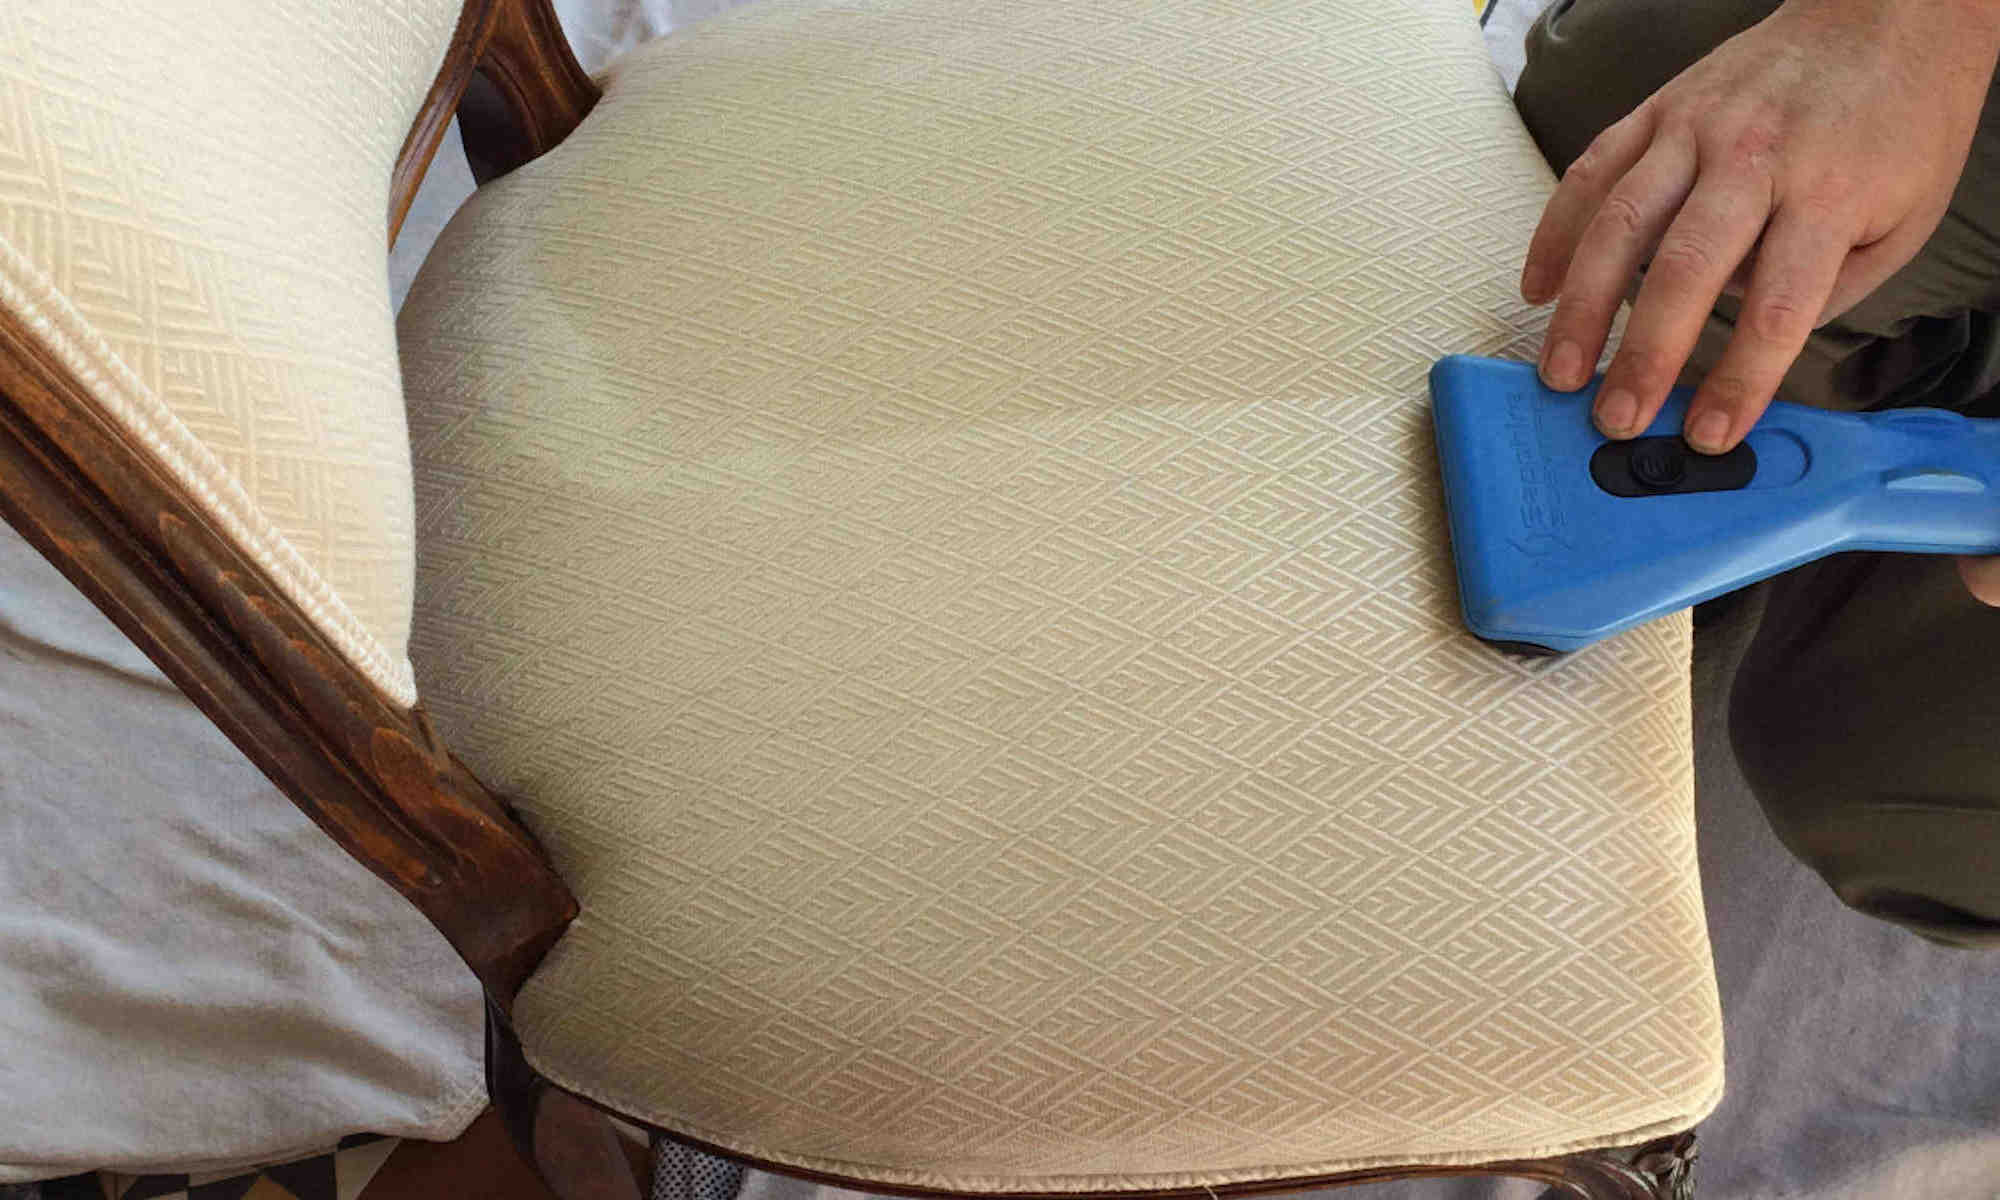 Upholstery Cleaning Melbourne - Steam Cleaning showing clean strokes on a dining chair